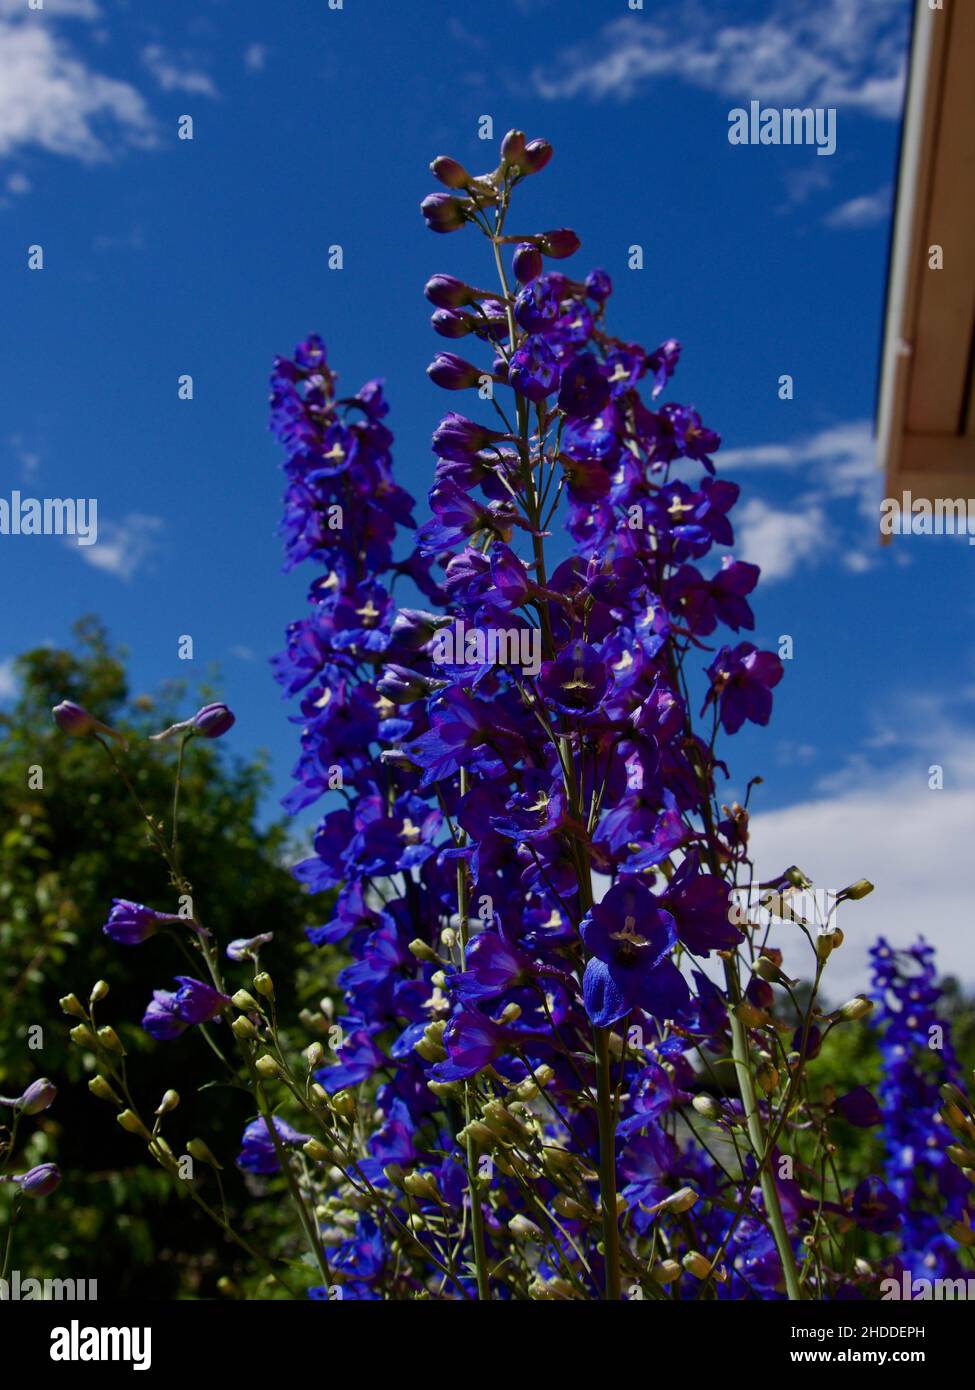 Delphinium,Candle Delphinium,many beautiful purple and blue flowers blooming in the garden,English Larkspur,Tall Larkspur Stock Photo